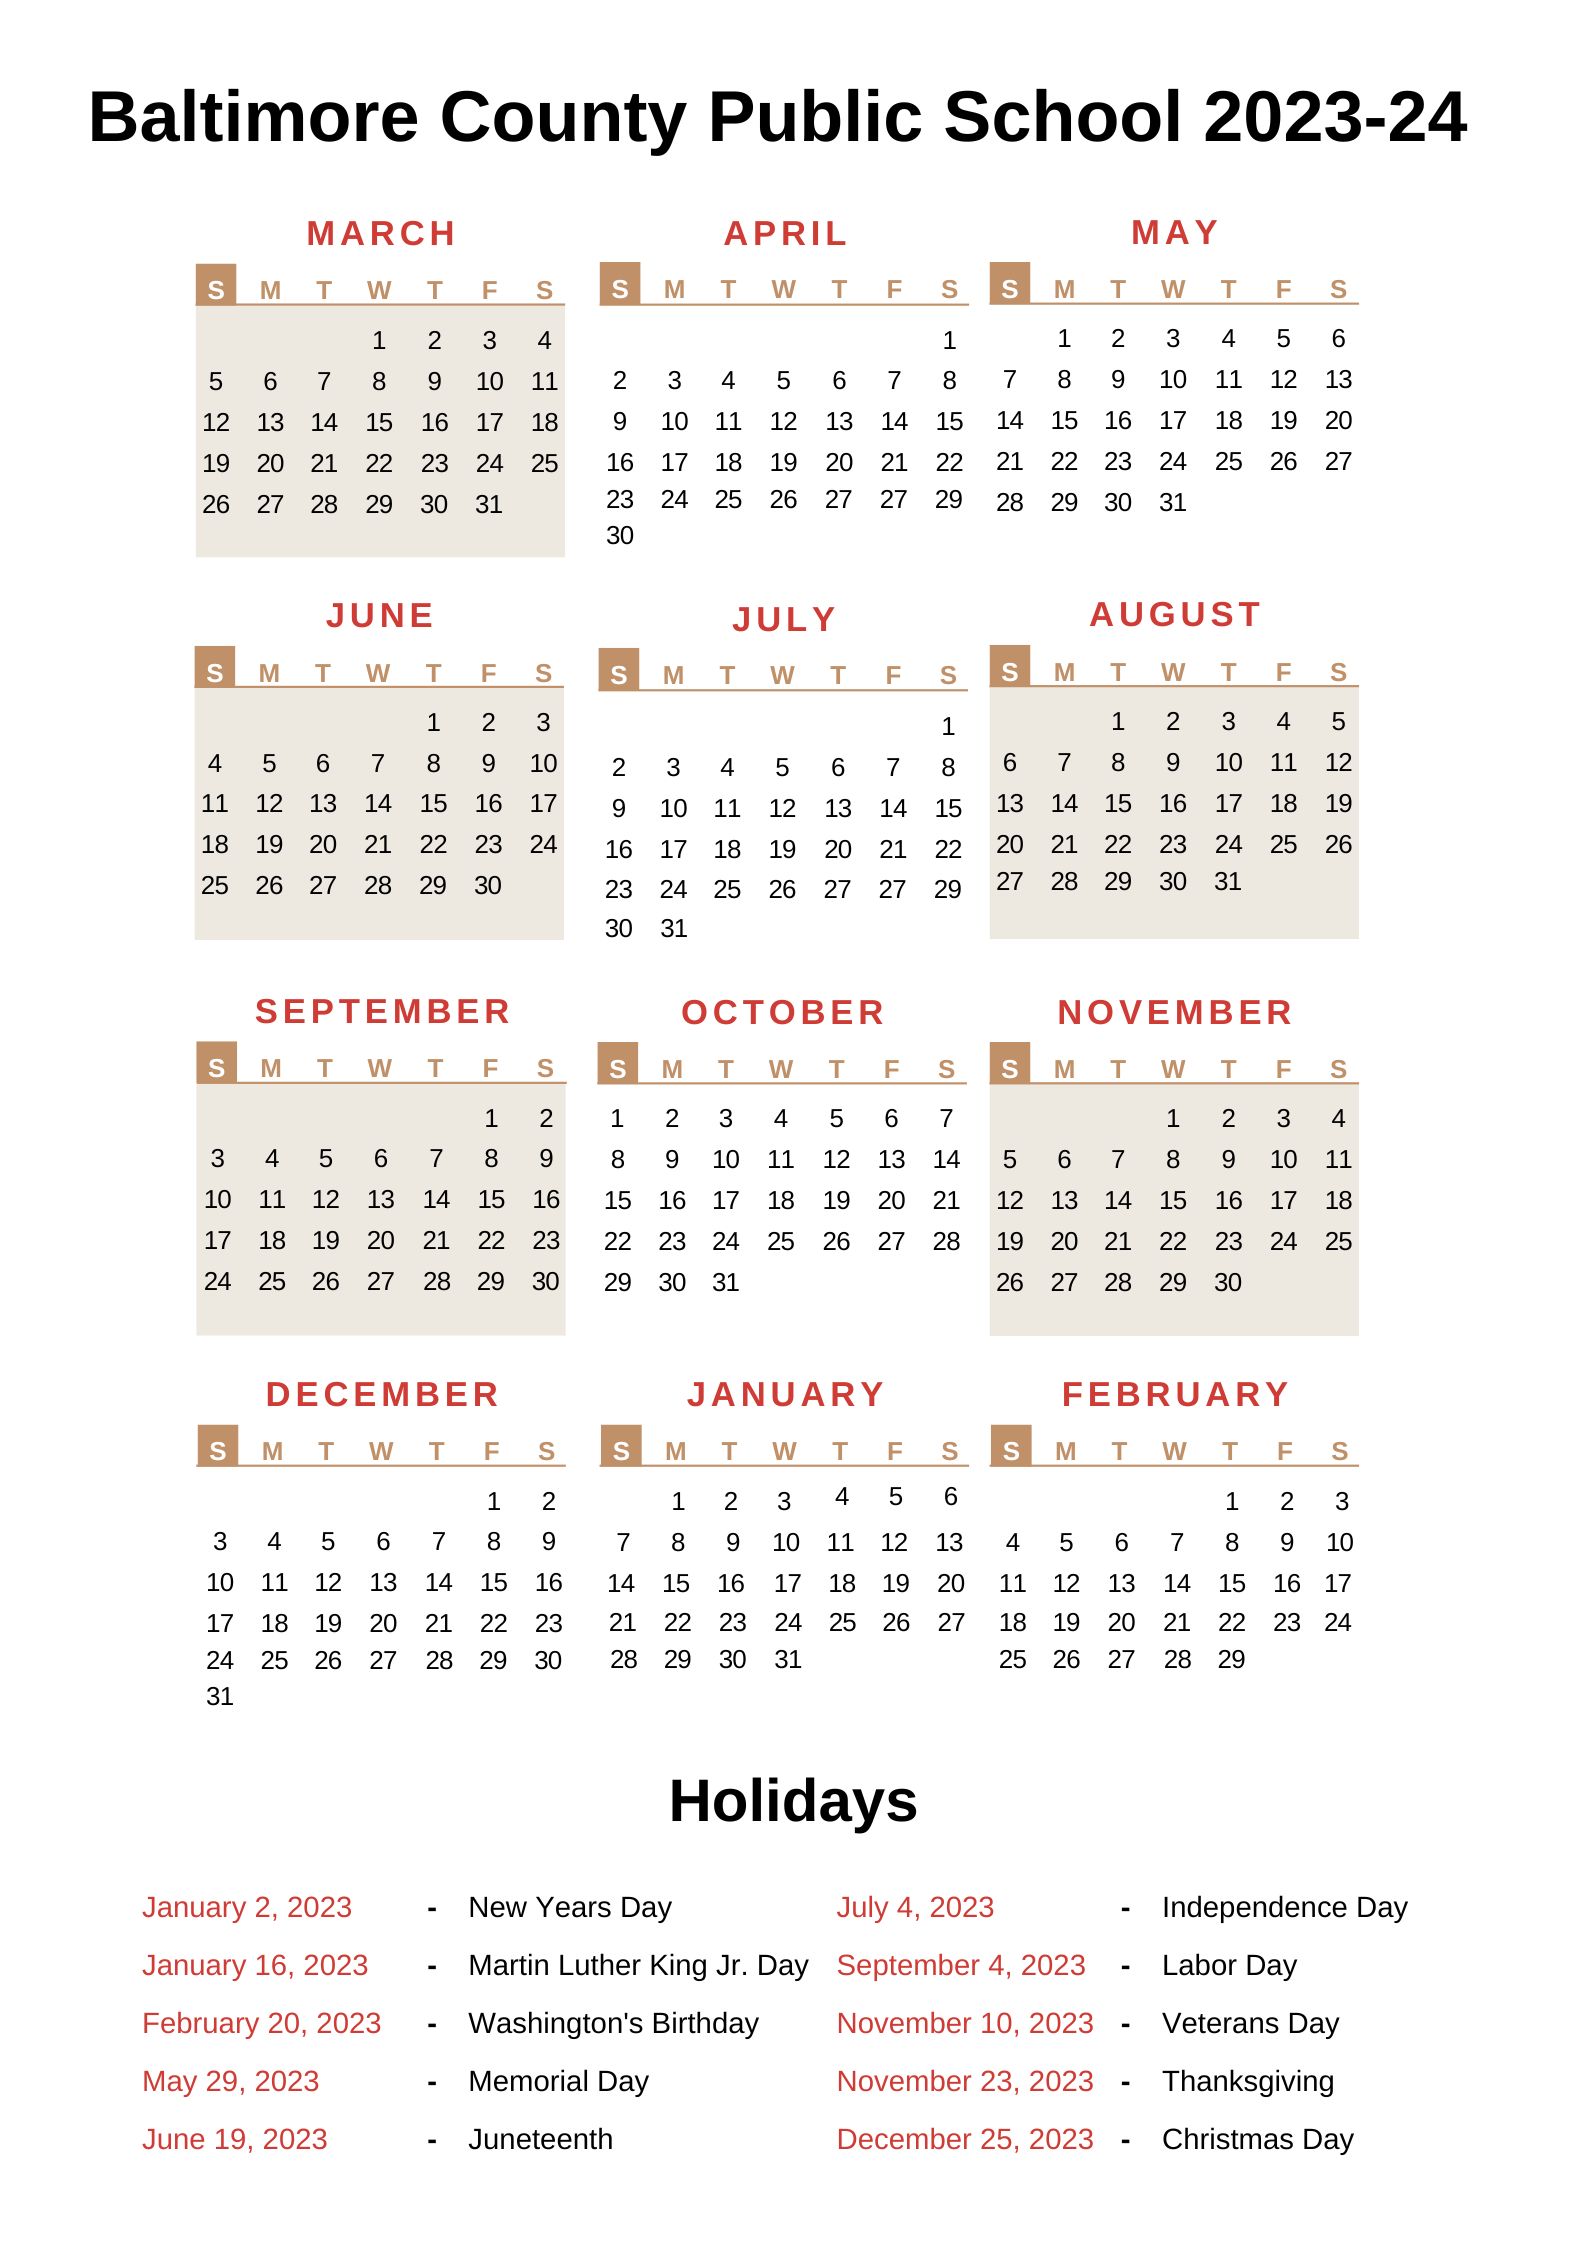 Baltimore County Public Schools Calendar 2023 24 With Holidays